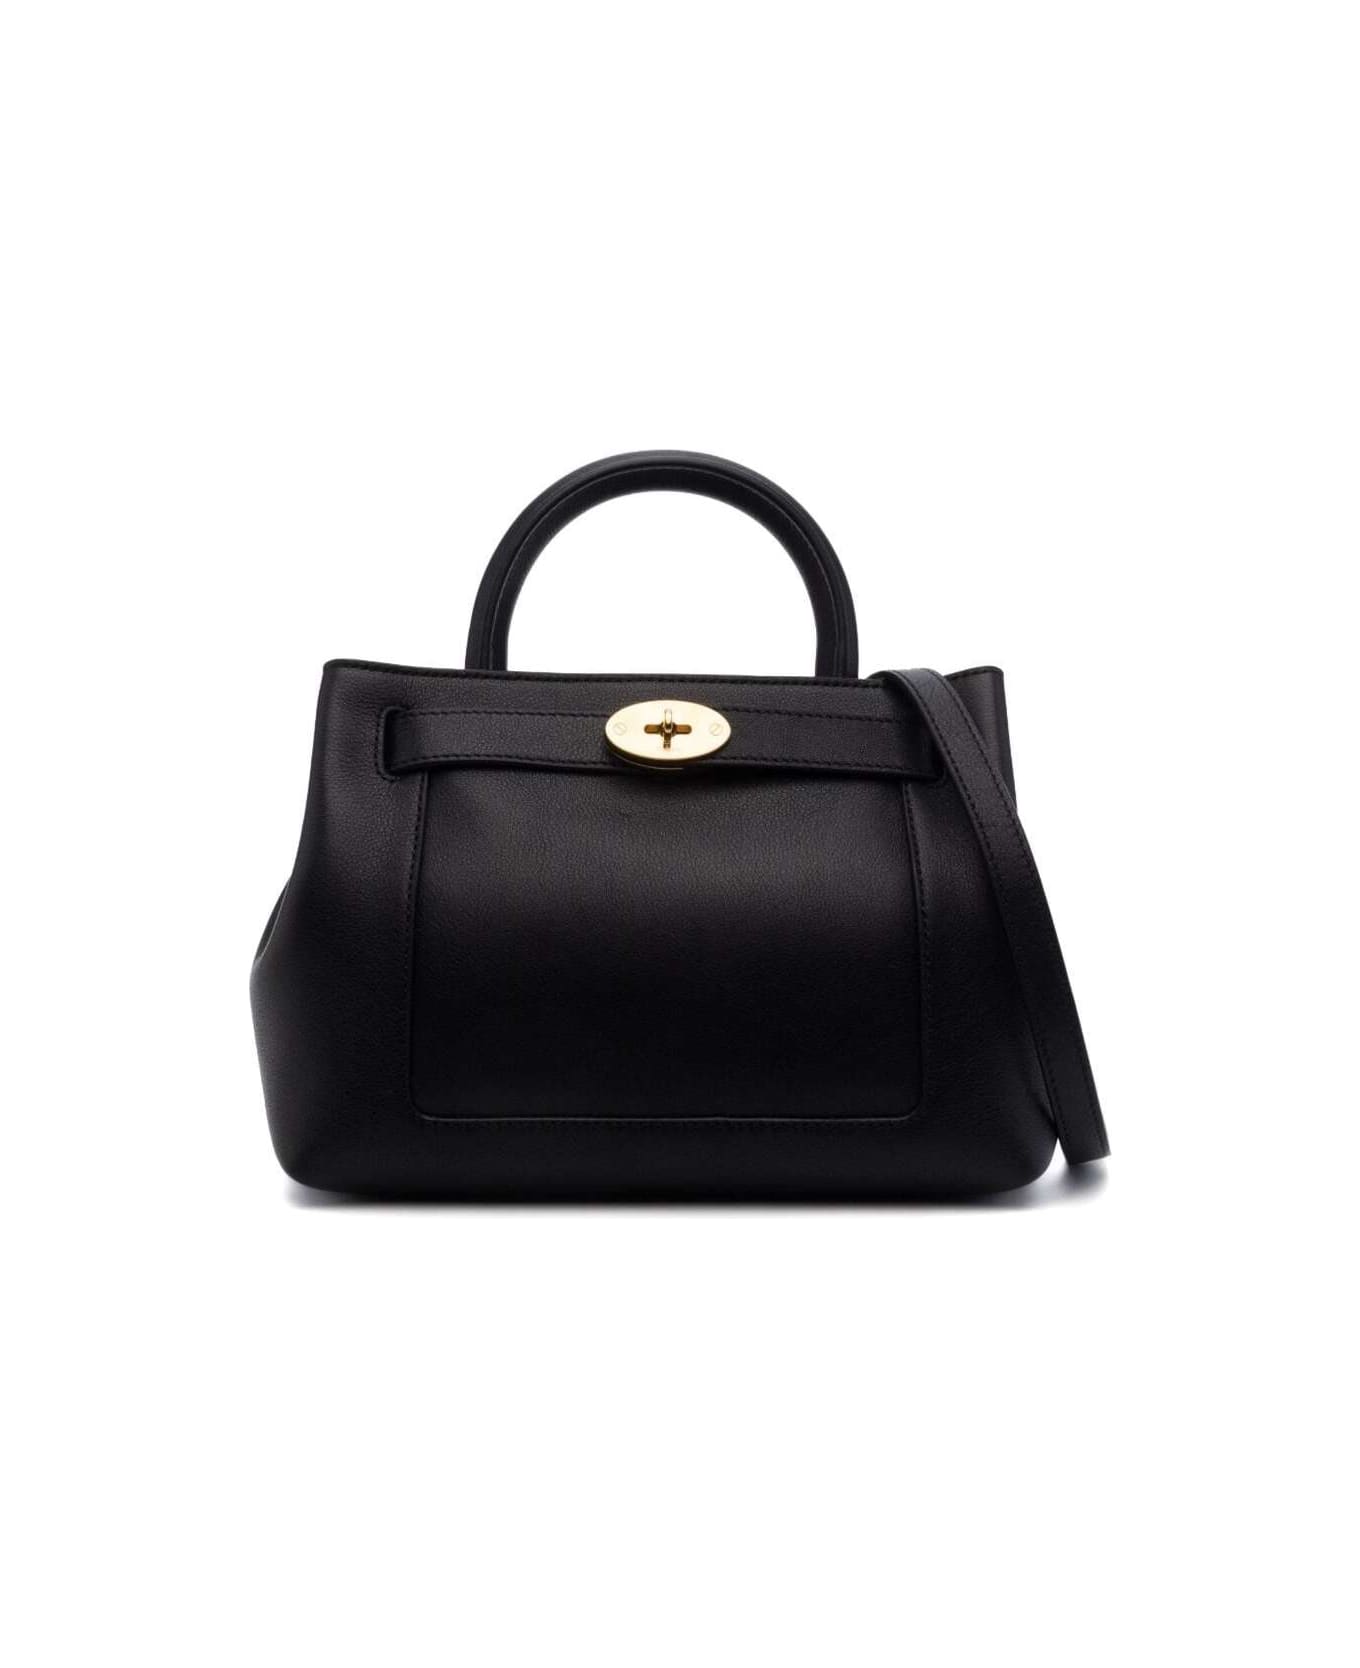 Mulberry Black Hand Bag With Single Handle And Gold-tone Details In Leather Woman - Black